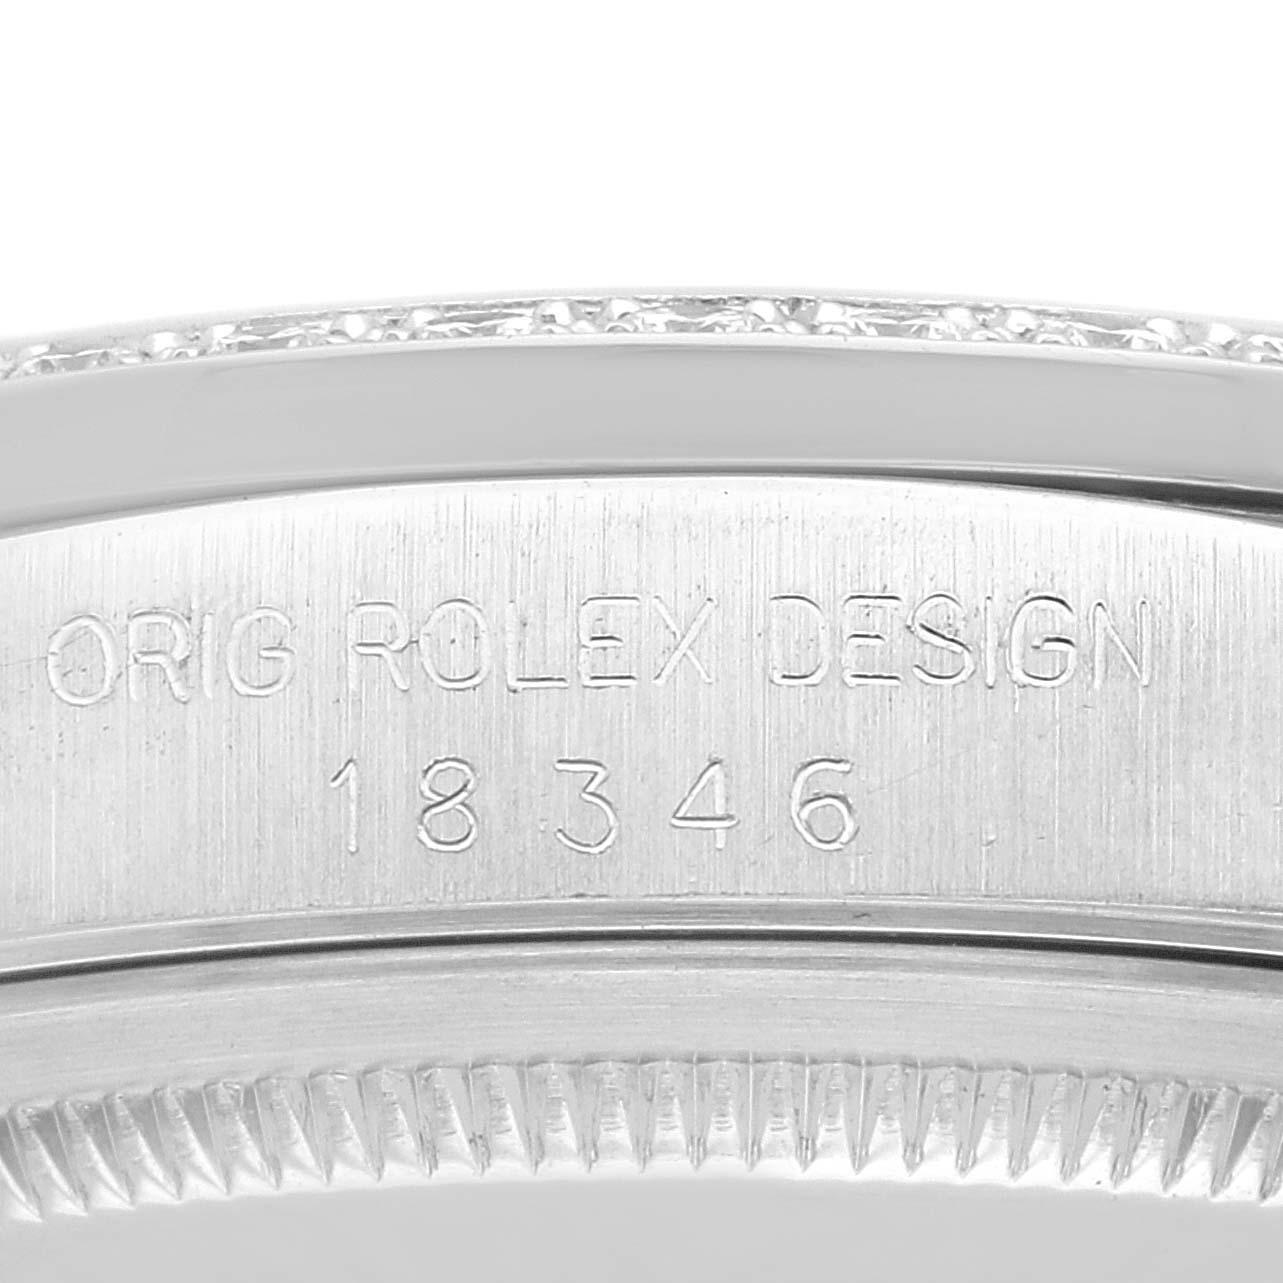 Rolex President Day-Date Platinum Diamond Mens Watch 18346. Officially certified chronometer automatic self-winding movement with quickset date function. Platinum oyster case 36.0 mm in diameter. Rolex logo on the crown. Original Rolex factory